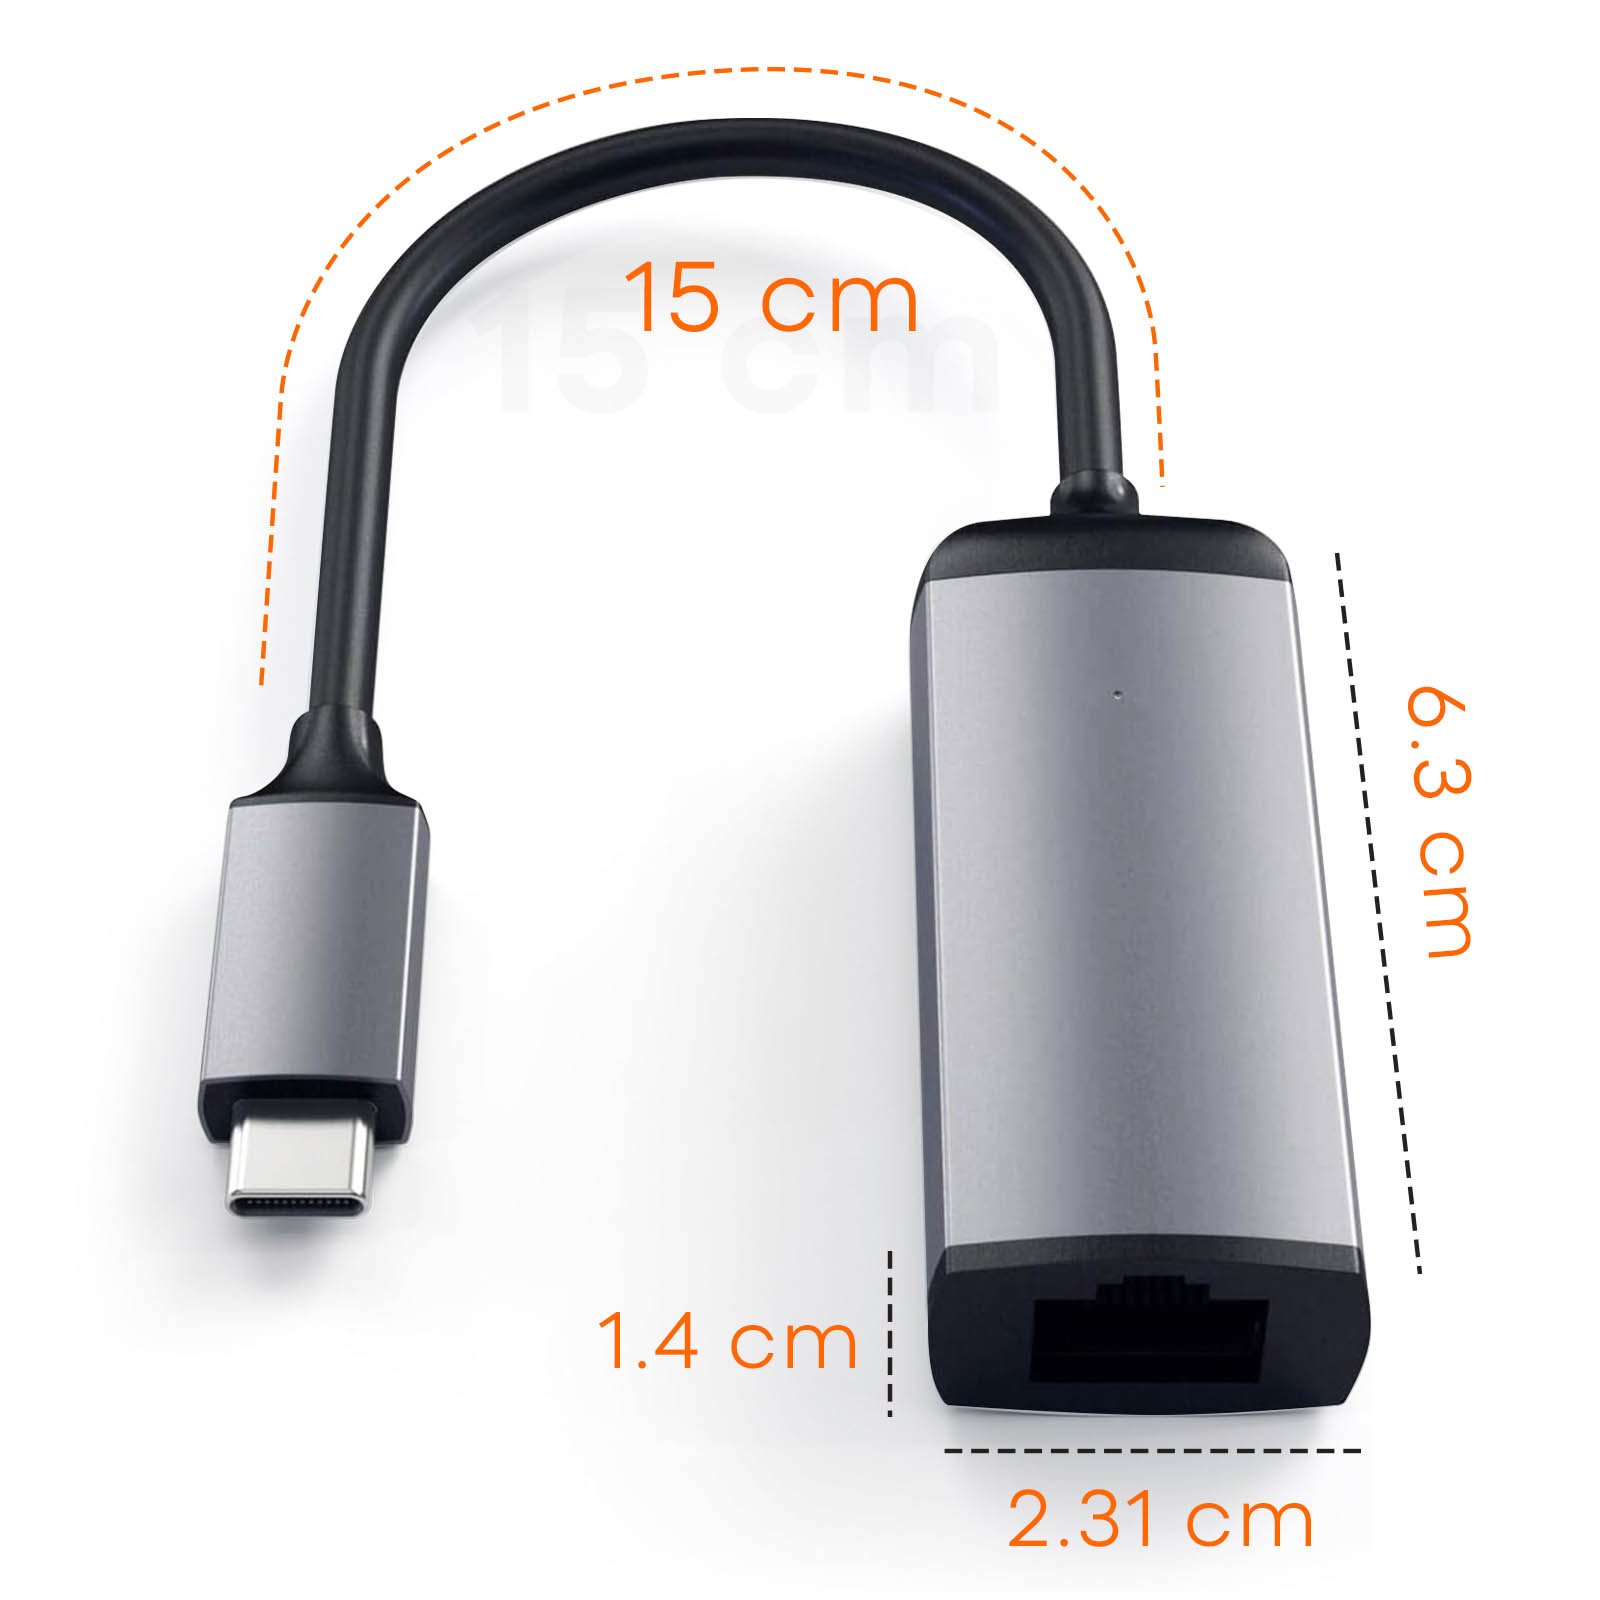 SATECHI ST-TCENS ADAPTER Adapter, ETHERNET Silber/Weiß SILVER TYPE-C TO